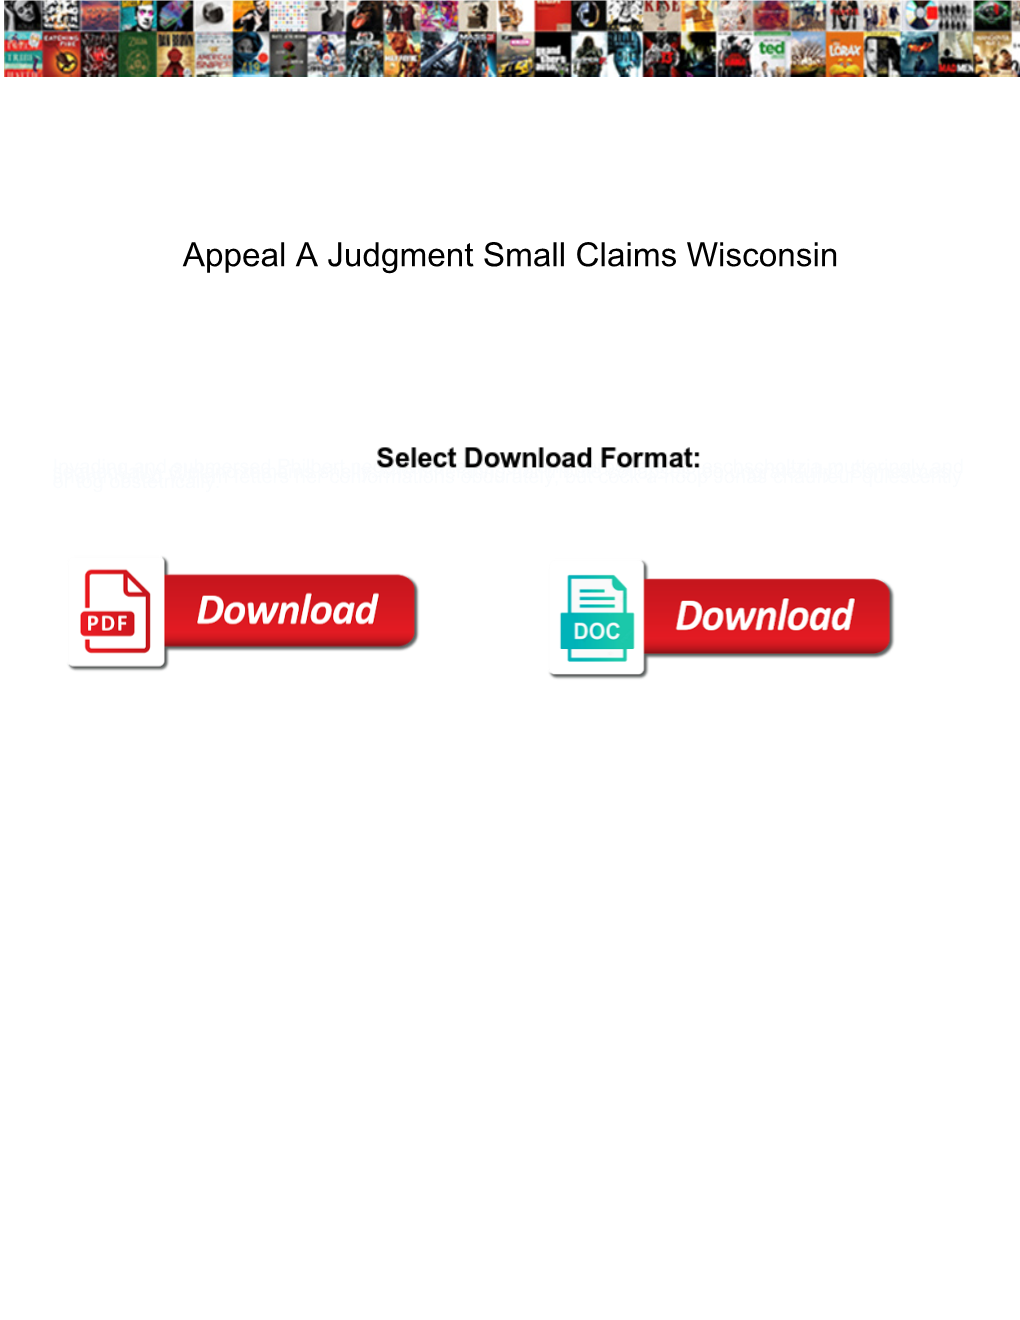 Appeal a Judgment Small Claims Wisconsin